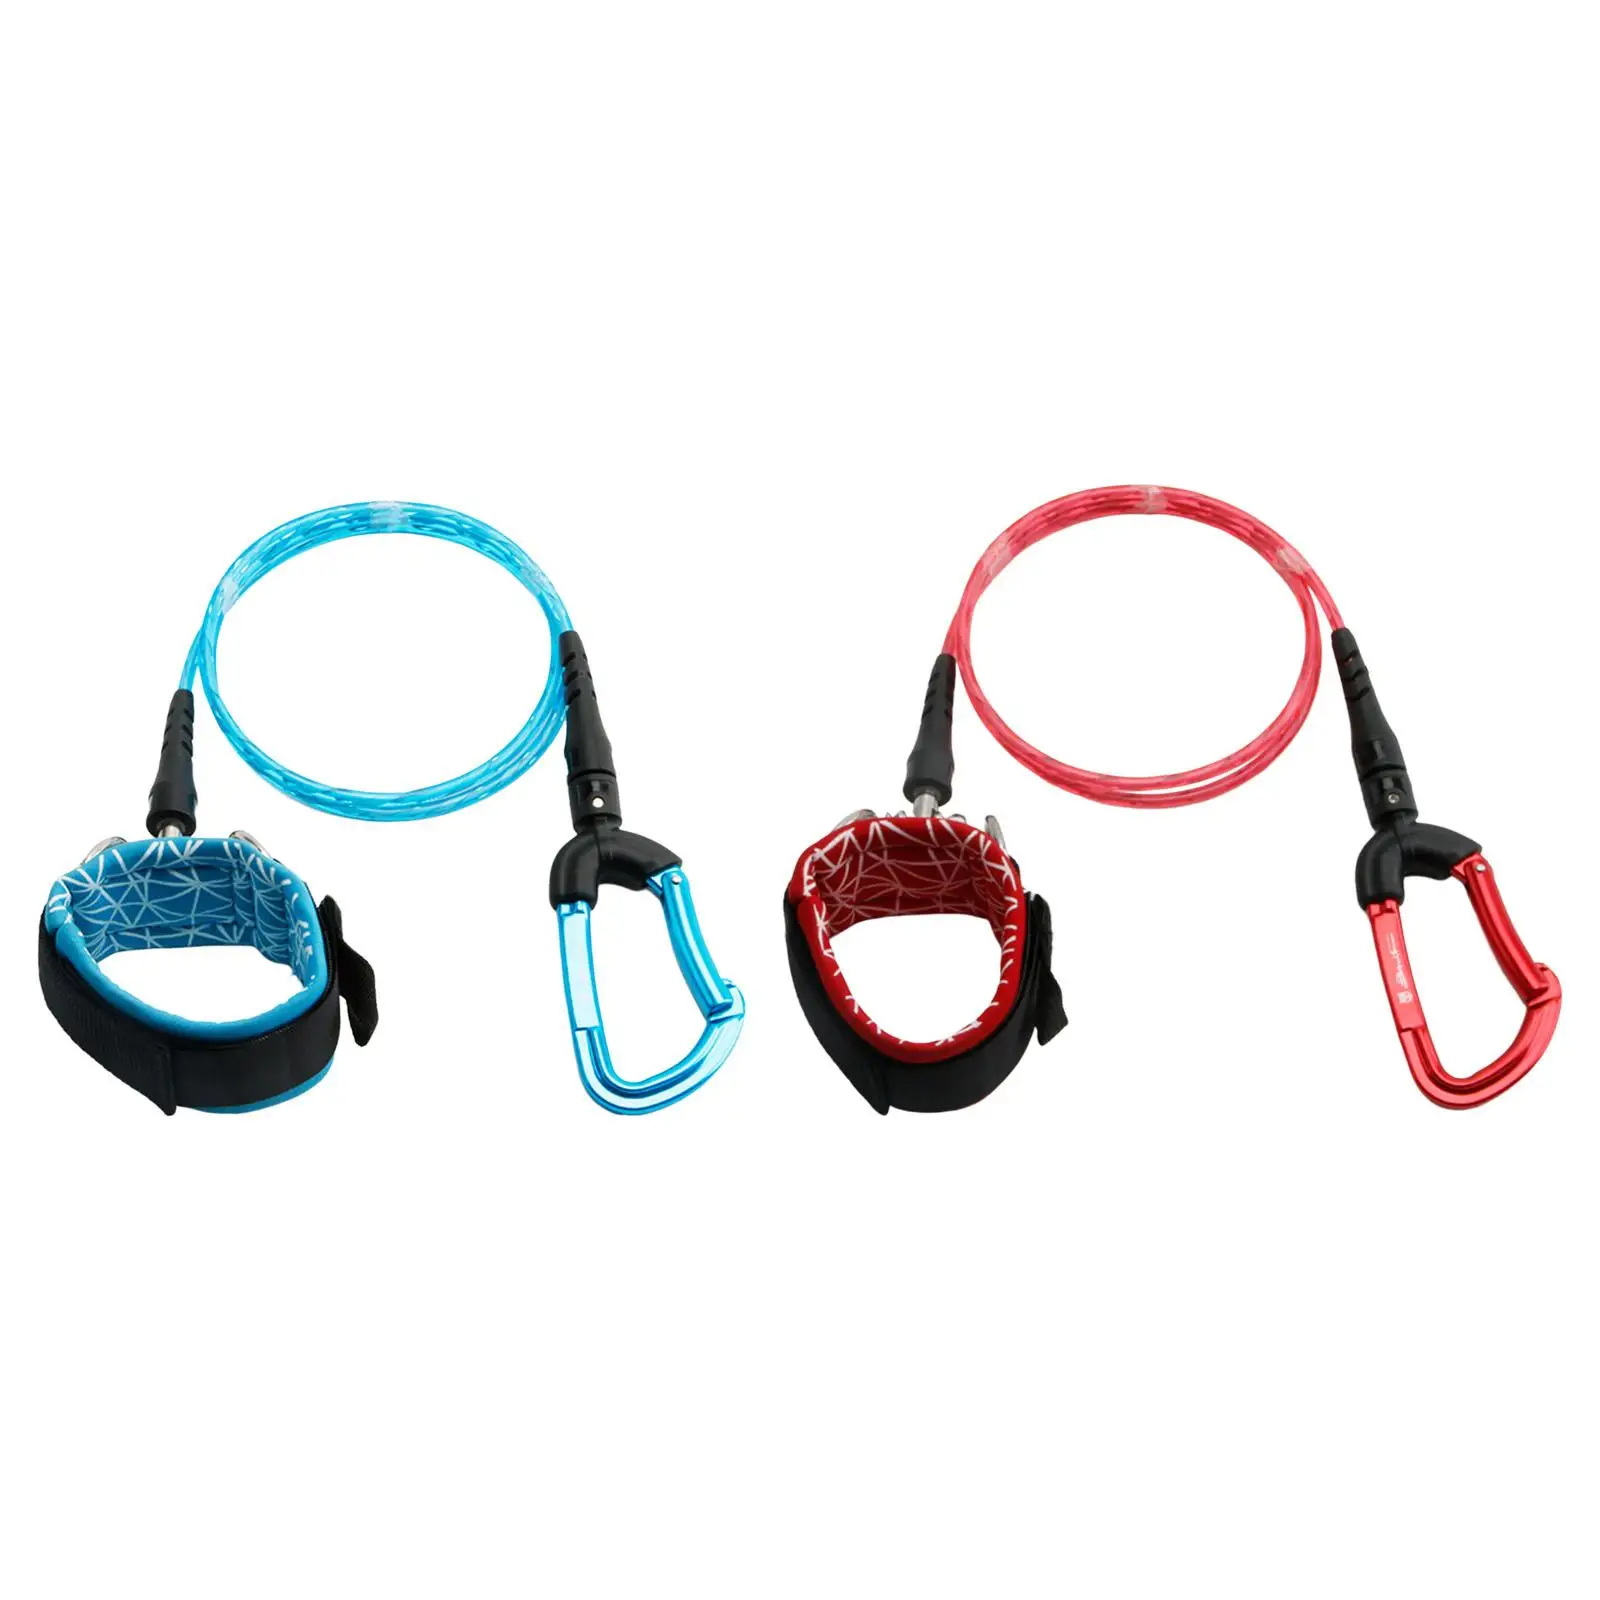 Freediving Lanyard with Adjustable Safety Rope for Drift Diving